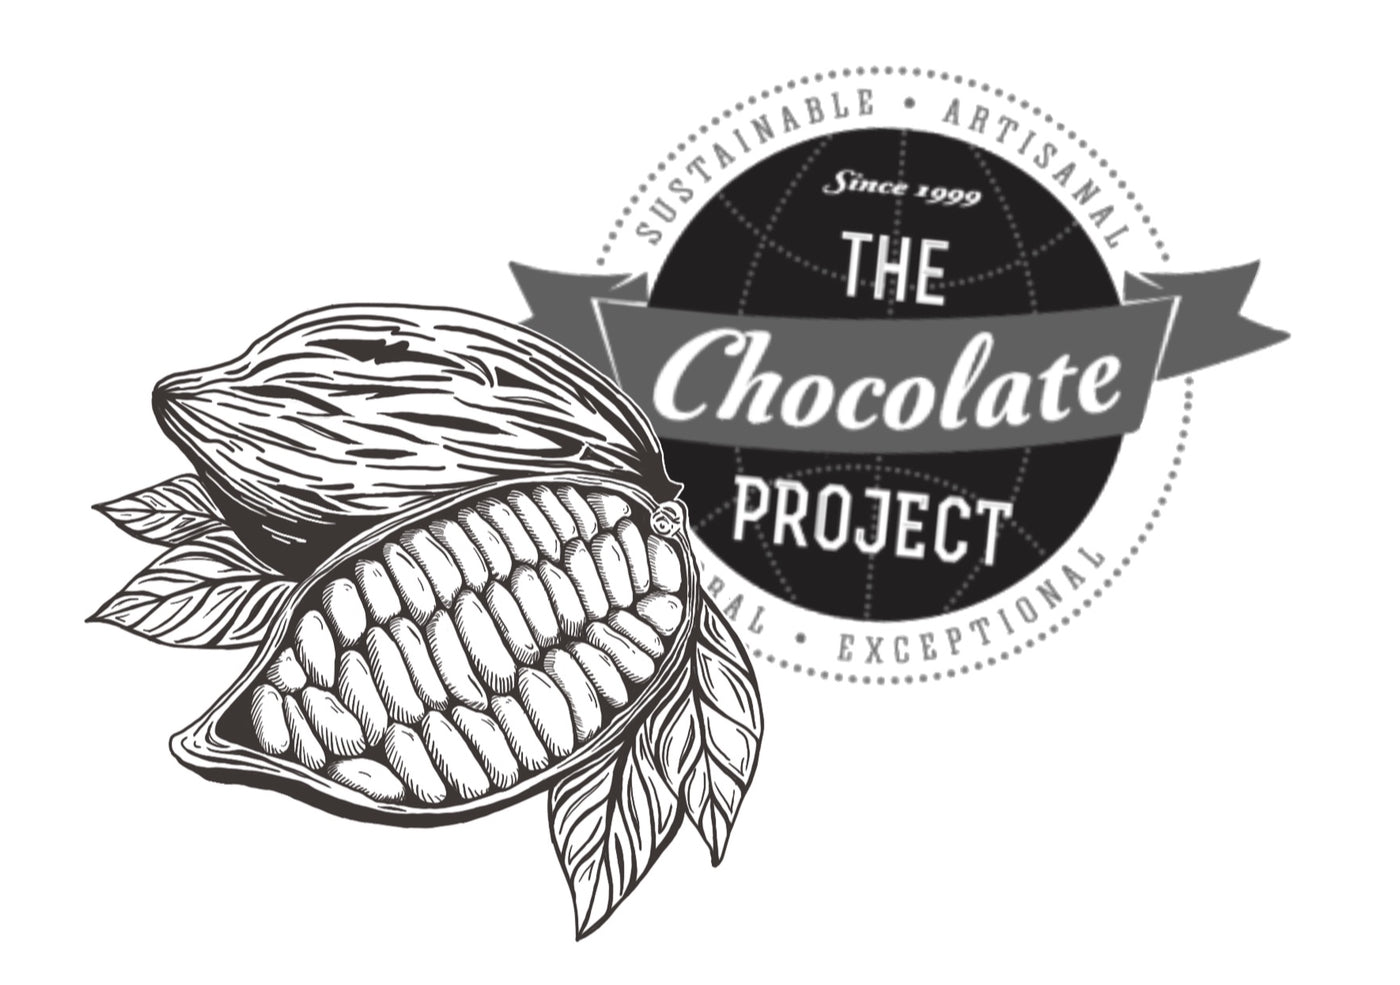 Chocolate Masterclass- Venezuela: Criollo and Rare White Seeded Varietals on Saturday, October 28th at 1:00 pm